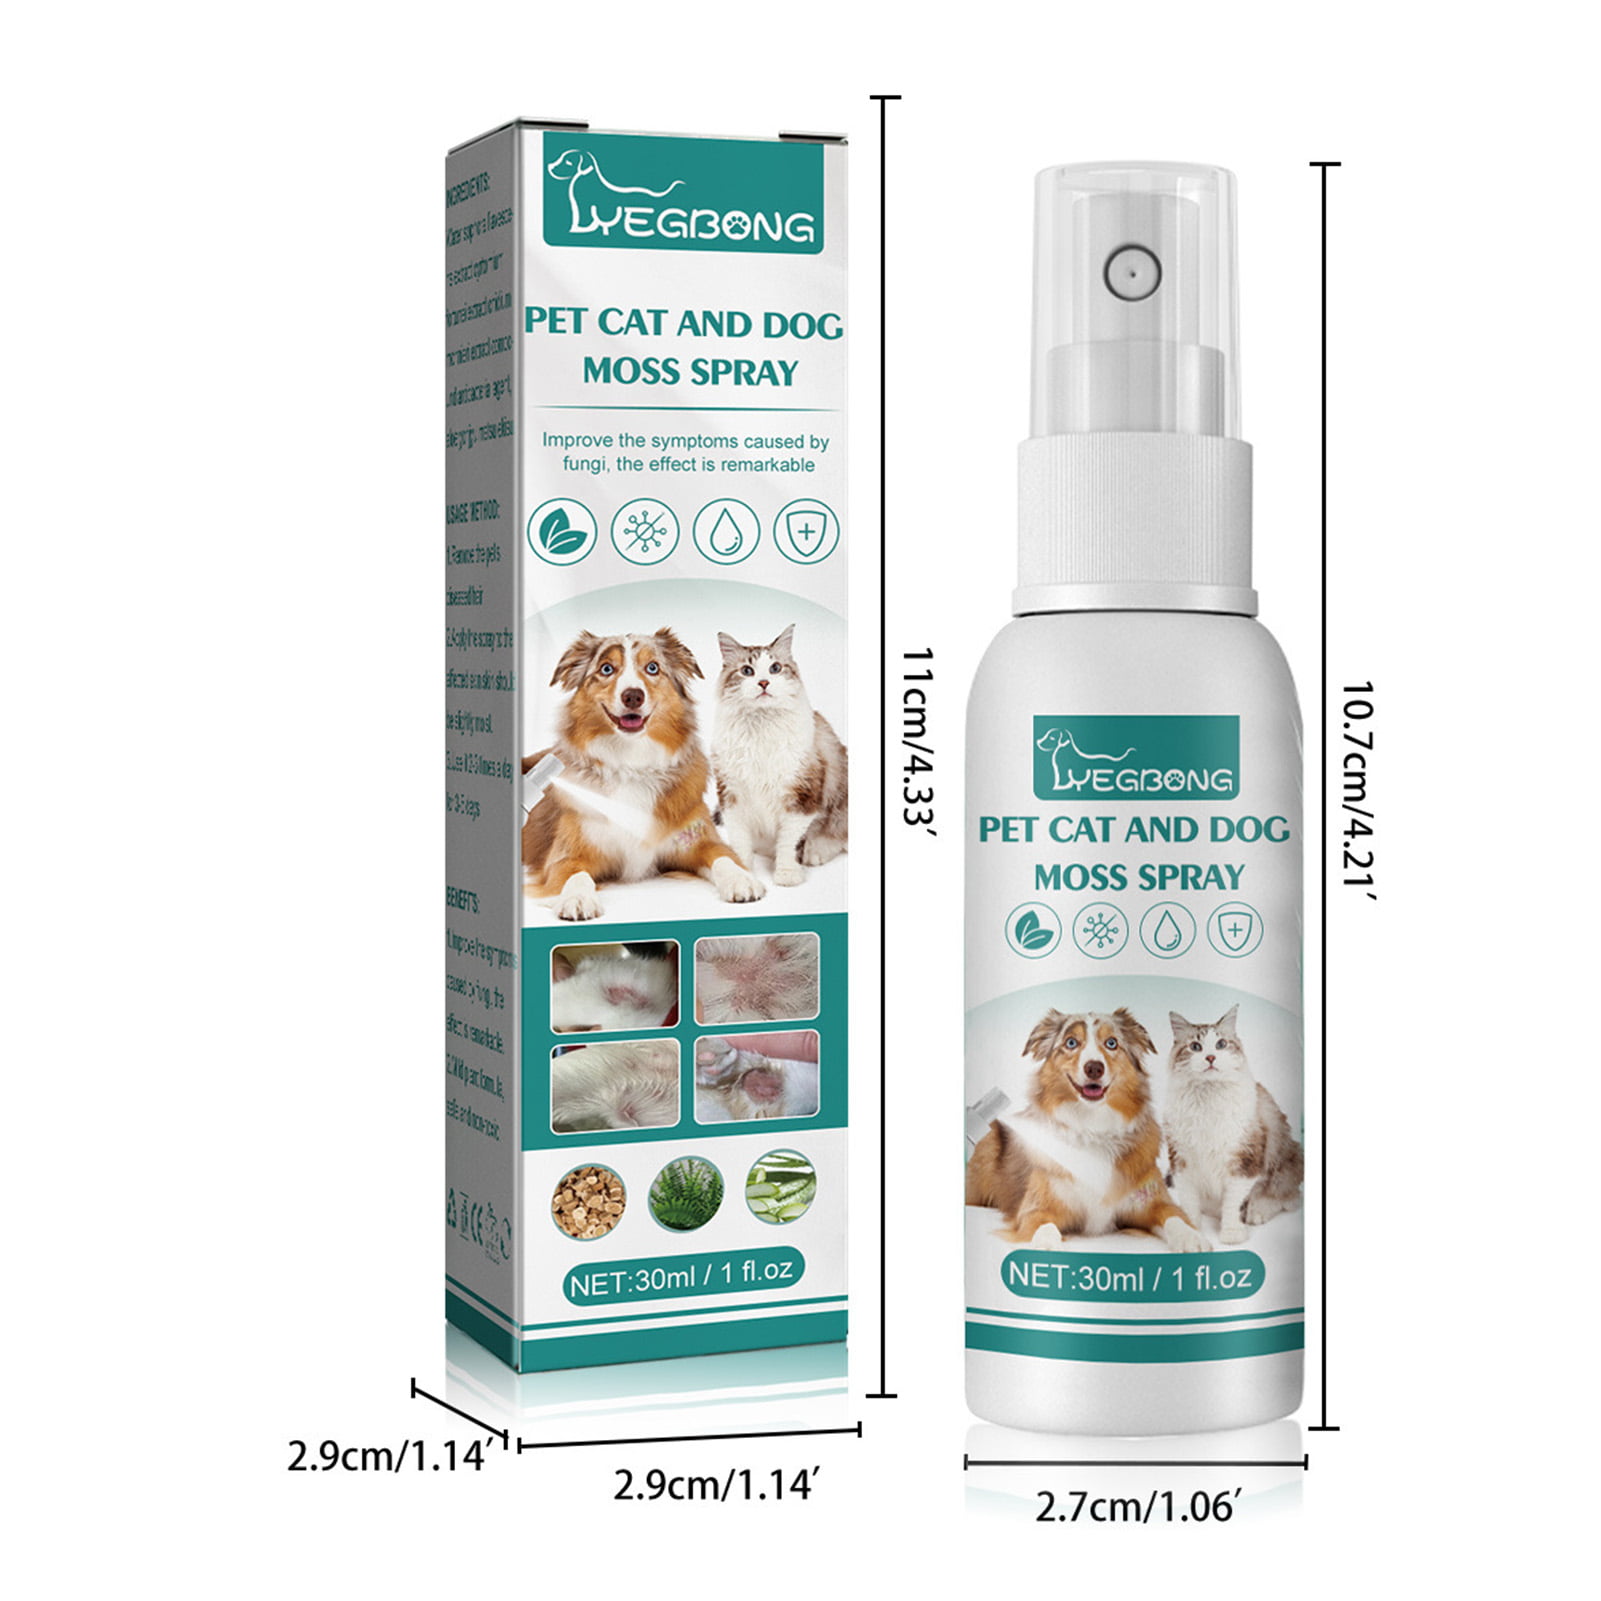 Toxic Cleaning Products For Pets - Mingala-Bark